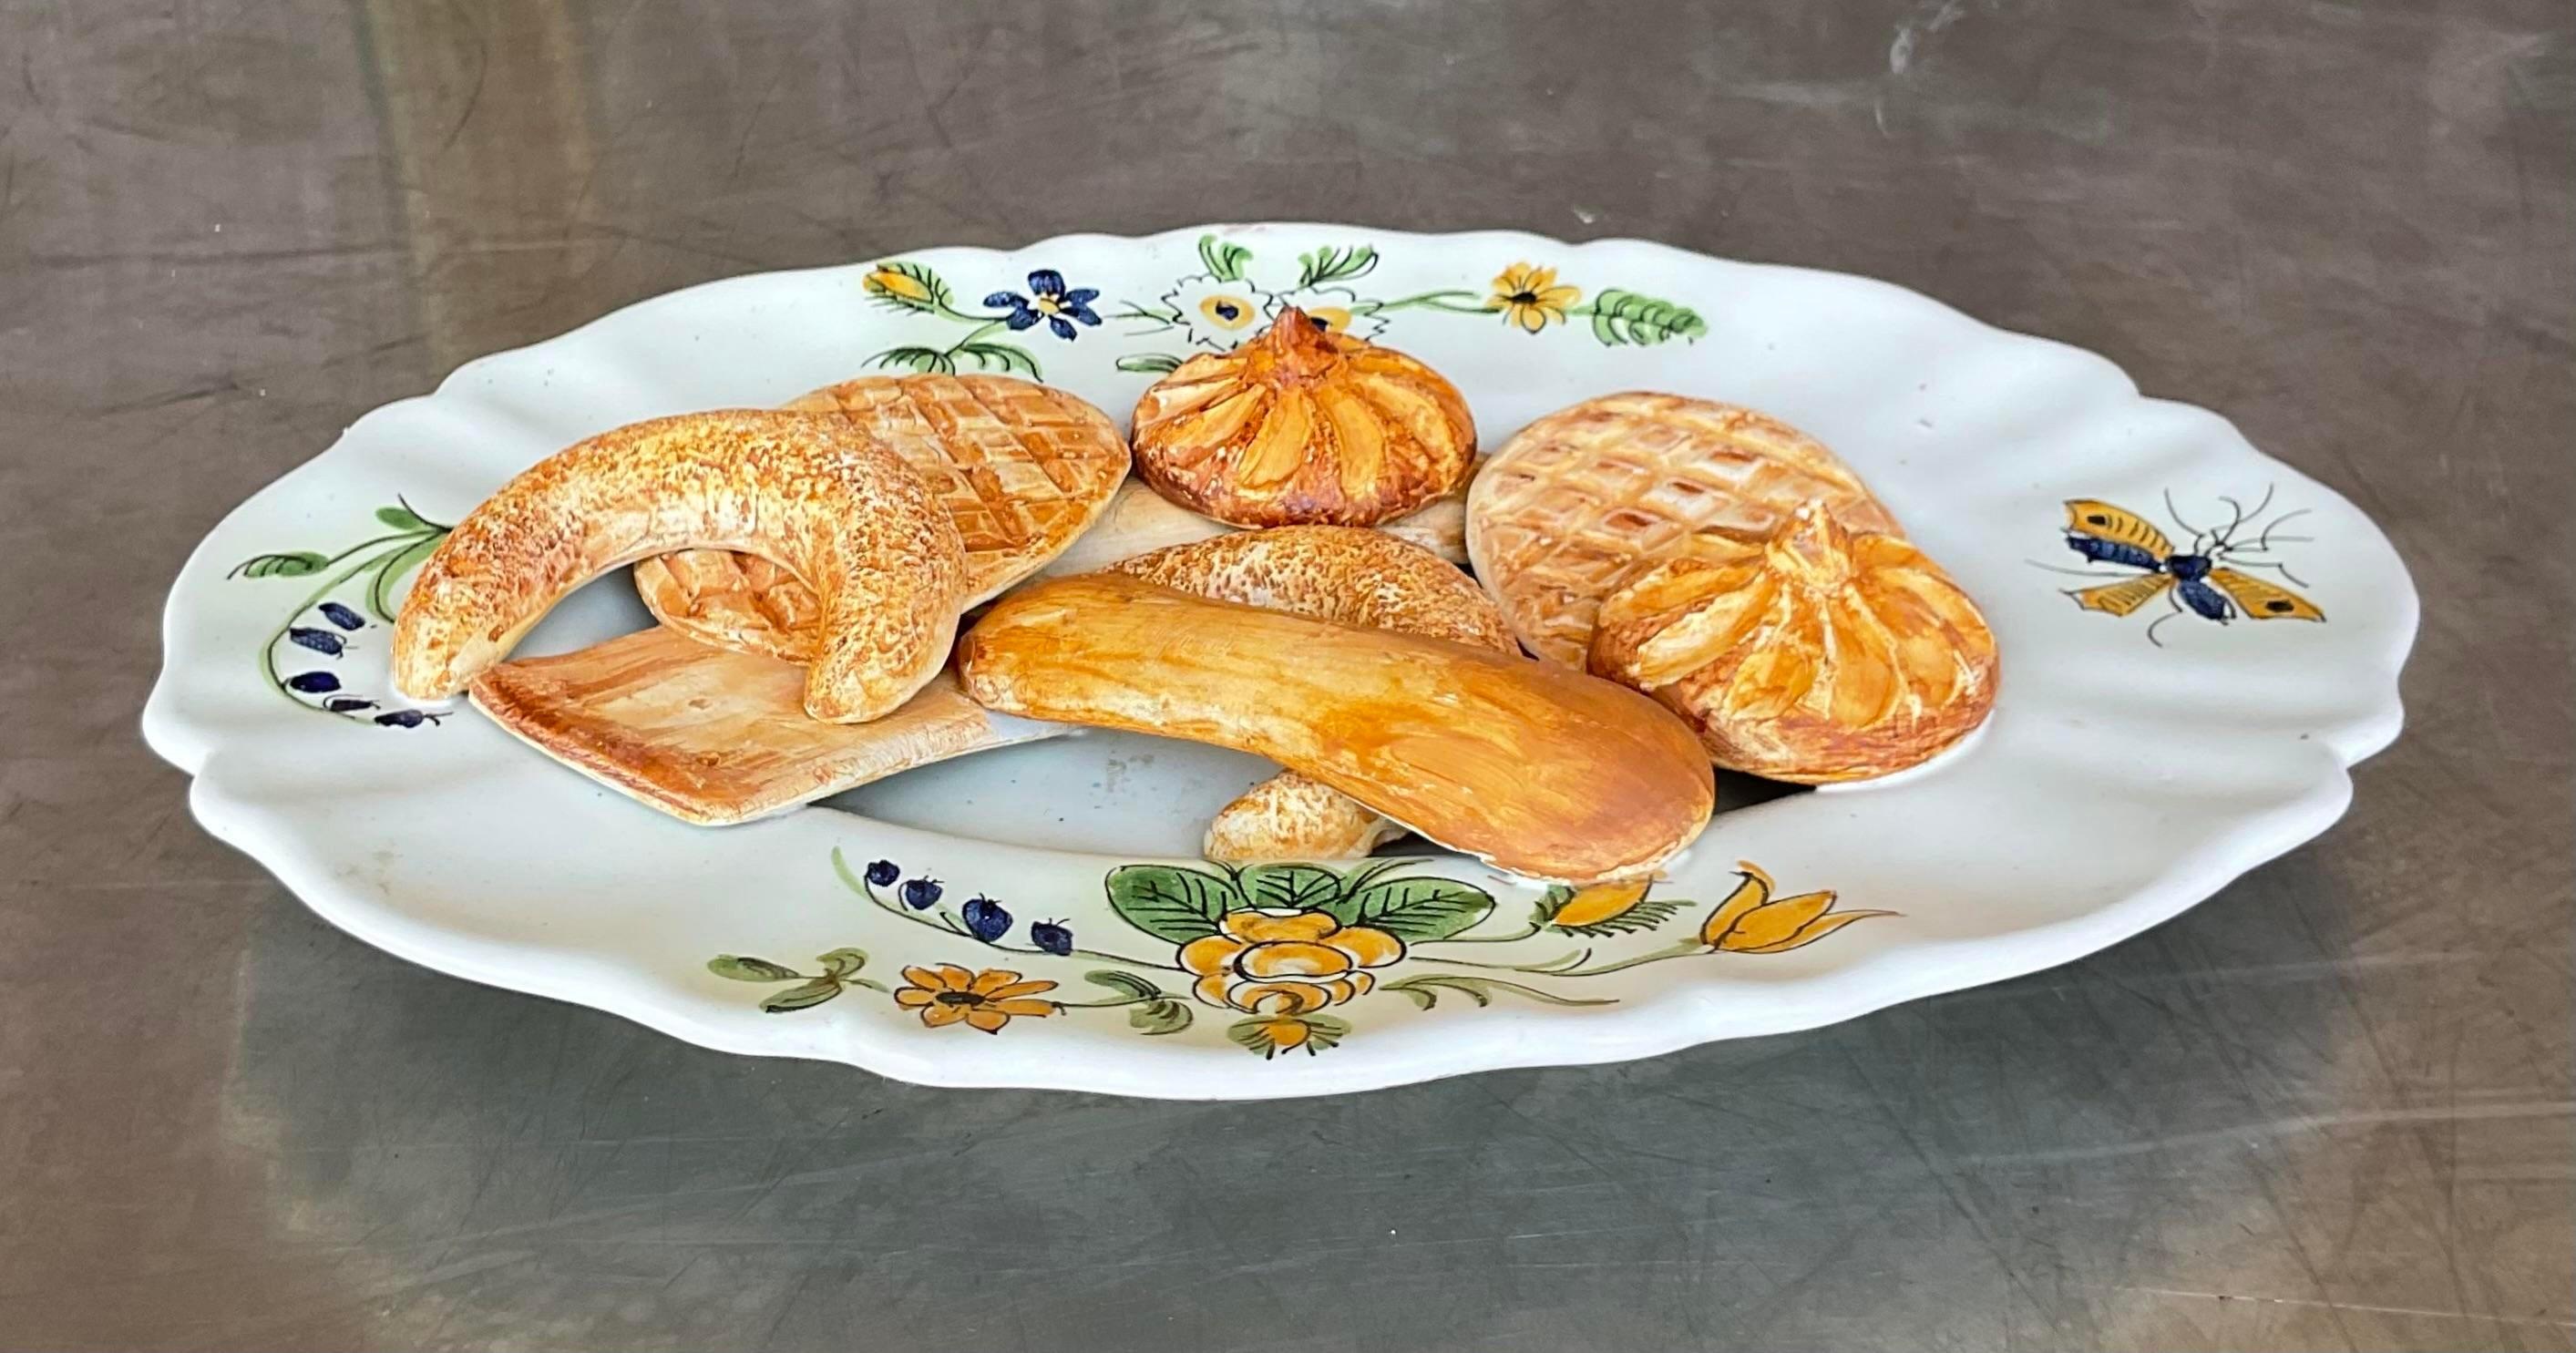 A stunning vintage Majolica plate of cookies. A charming composition with amazing hand painted detail. Made in Italy. Acquired from a Miami estate.